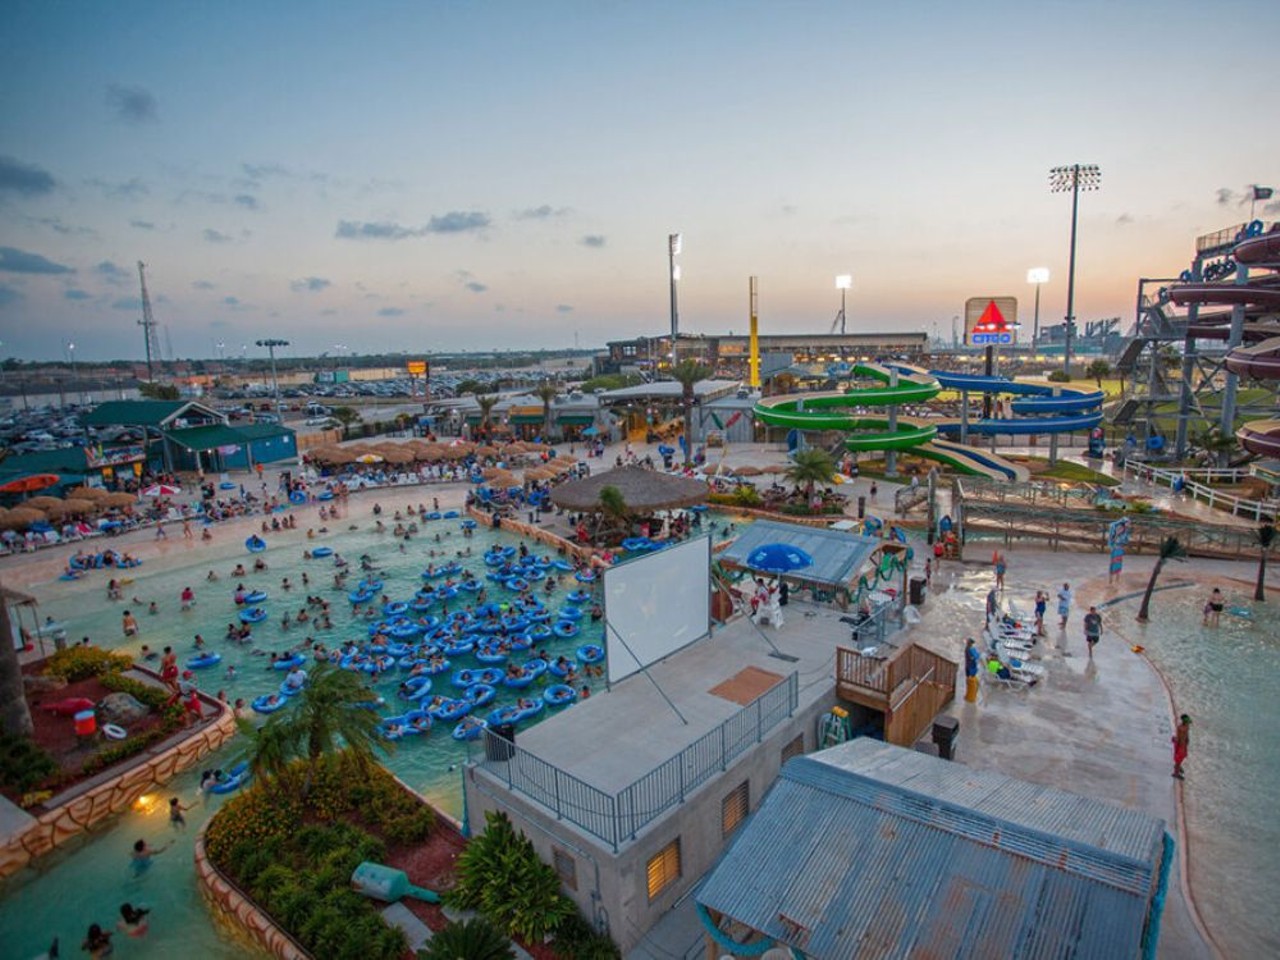 Hurricane Alley Waterpark
702 E. Port Ave., Corpus Christi, (361) 883-9283, hurricanealleycc.com
Head to the coast and you’ll be able to have loads of water fun without actually visiting the beach (if you care about that sort of thing). The park’s wave pool, lazy river, slides and thrill rides will have you forgetting that you’re not actually in the ocean, you’ll be having that much fun.